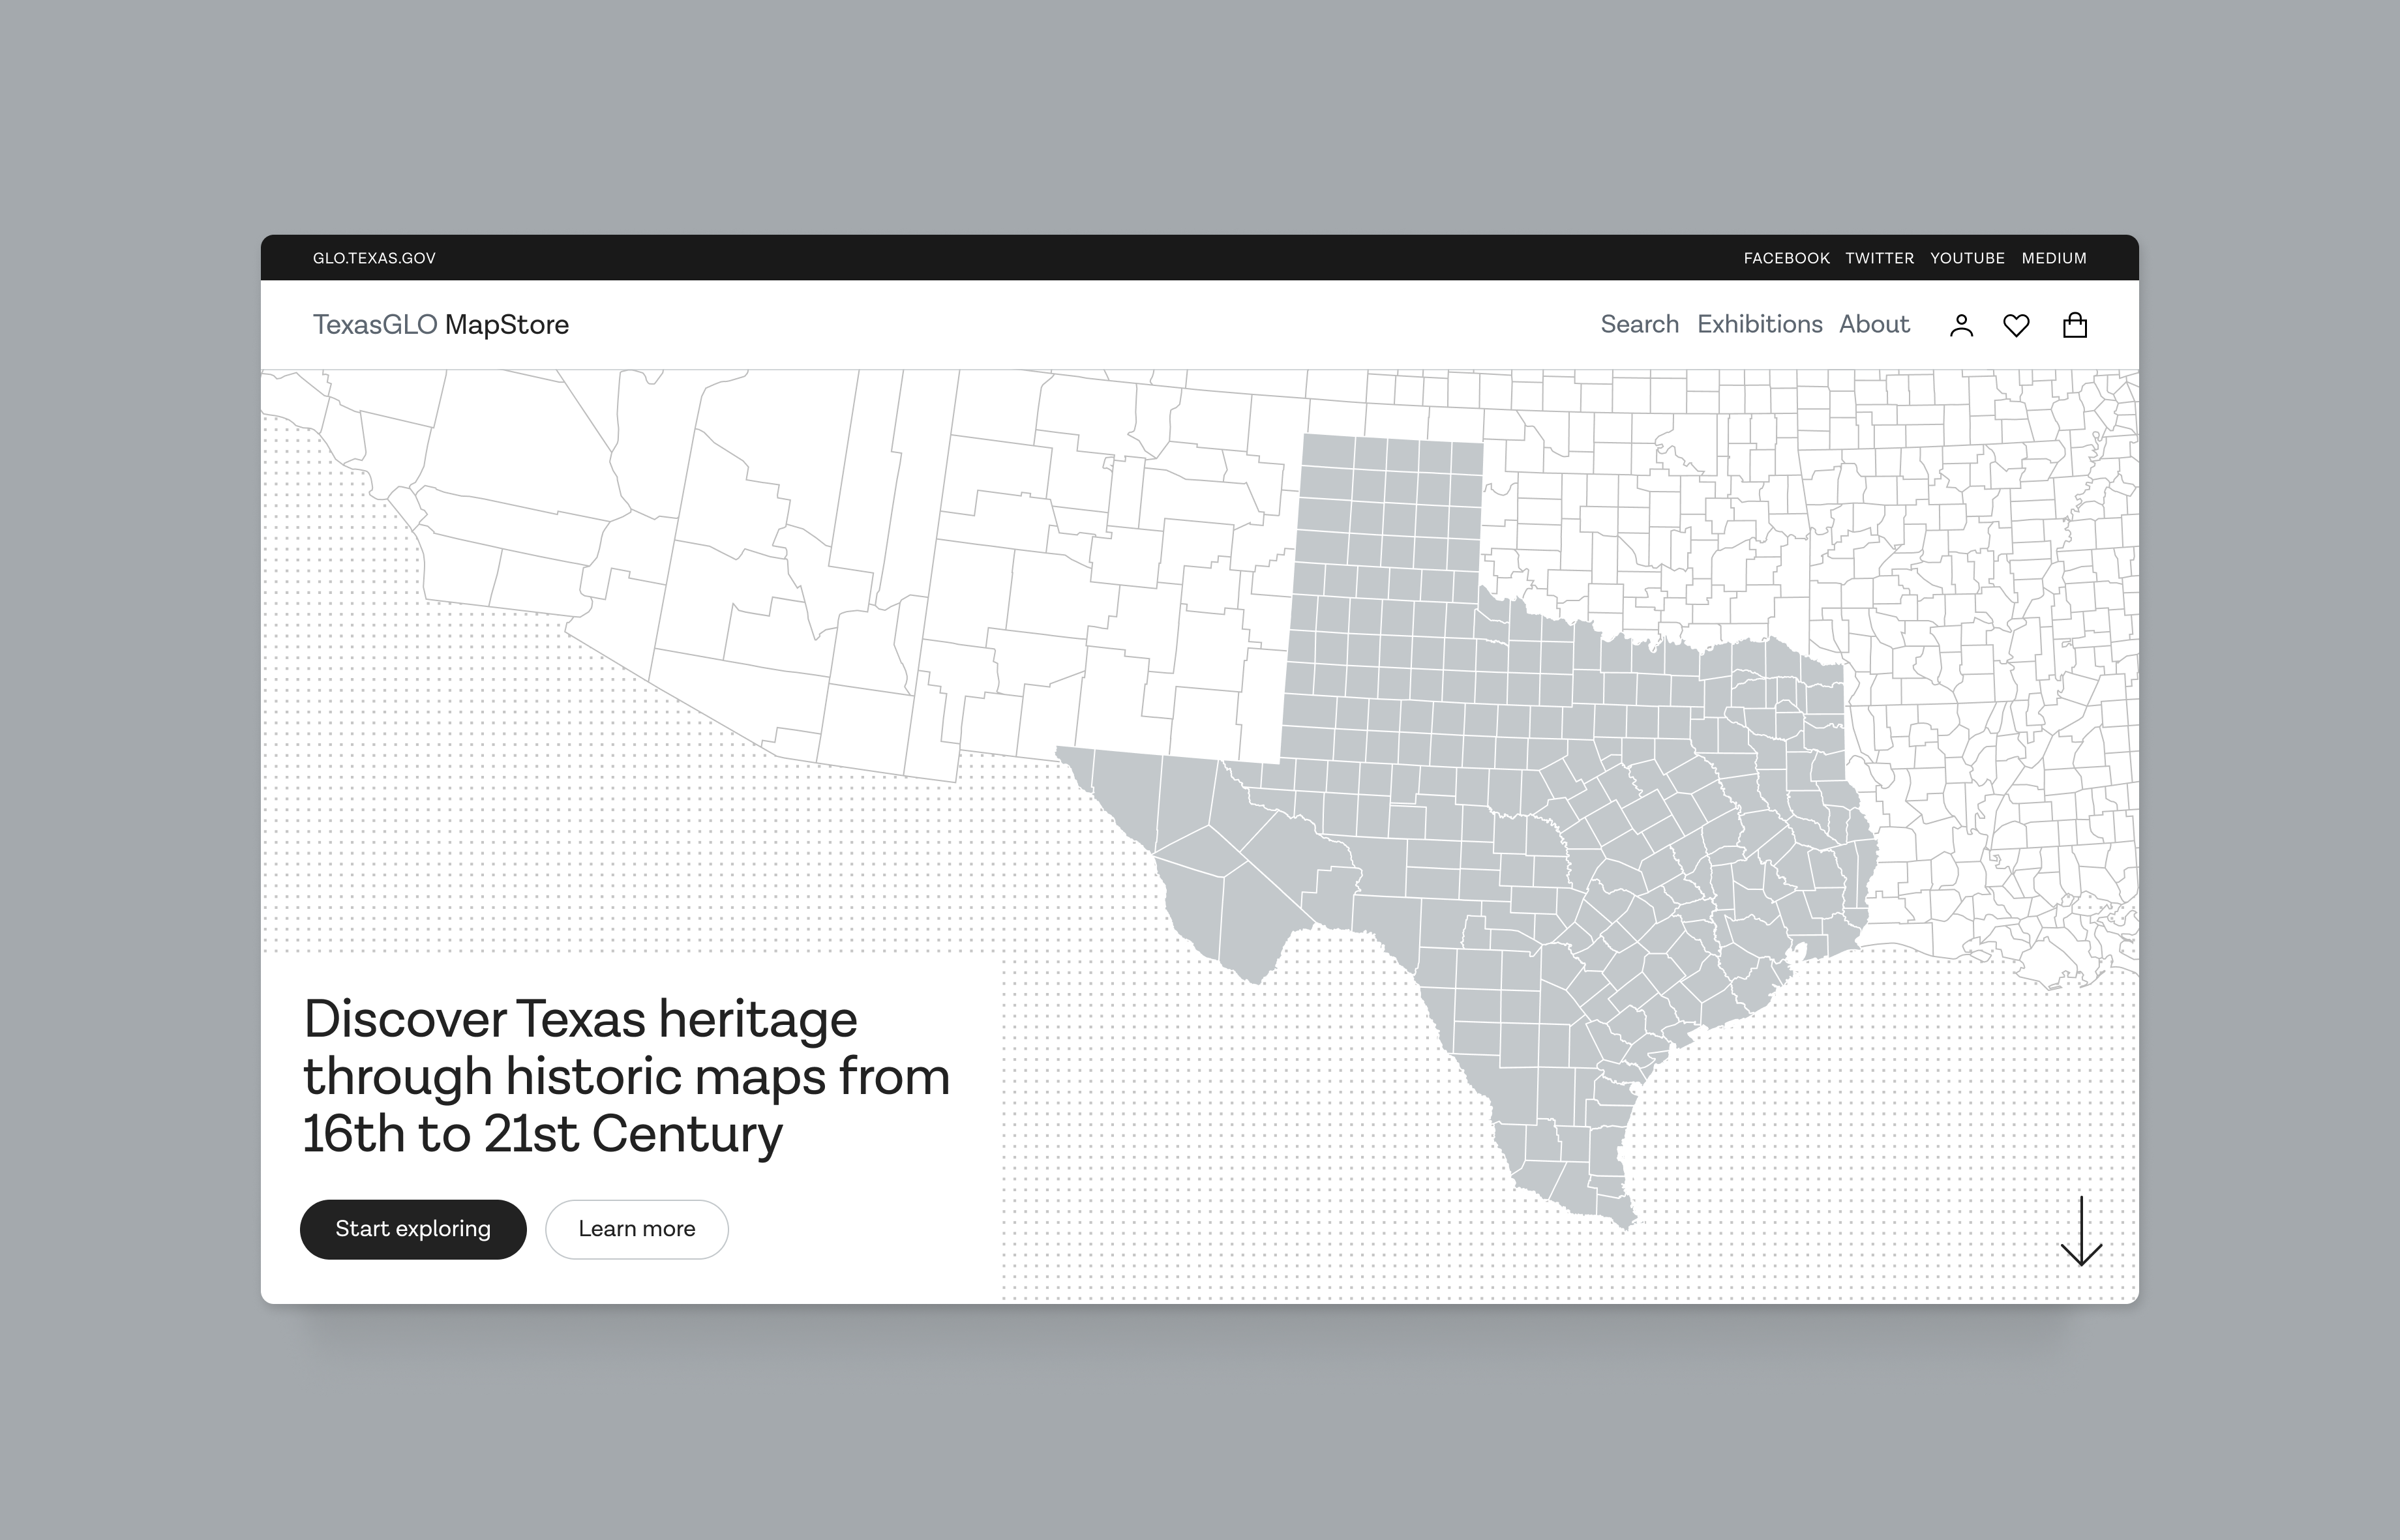 Texas GLO Mapstore project image